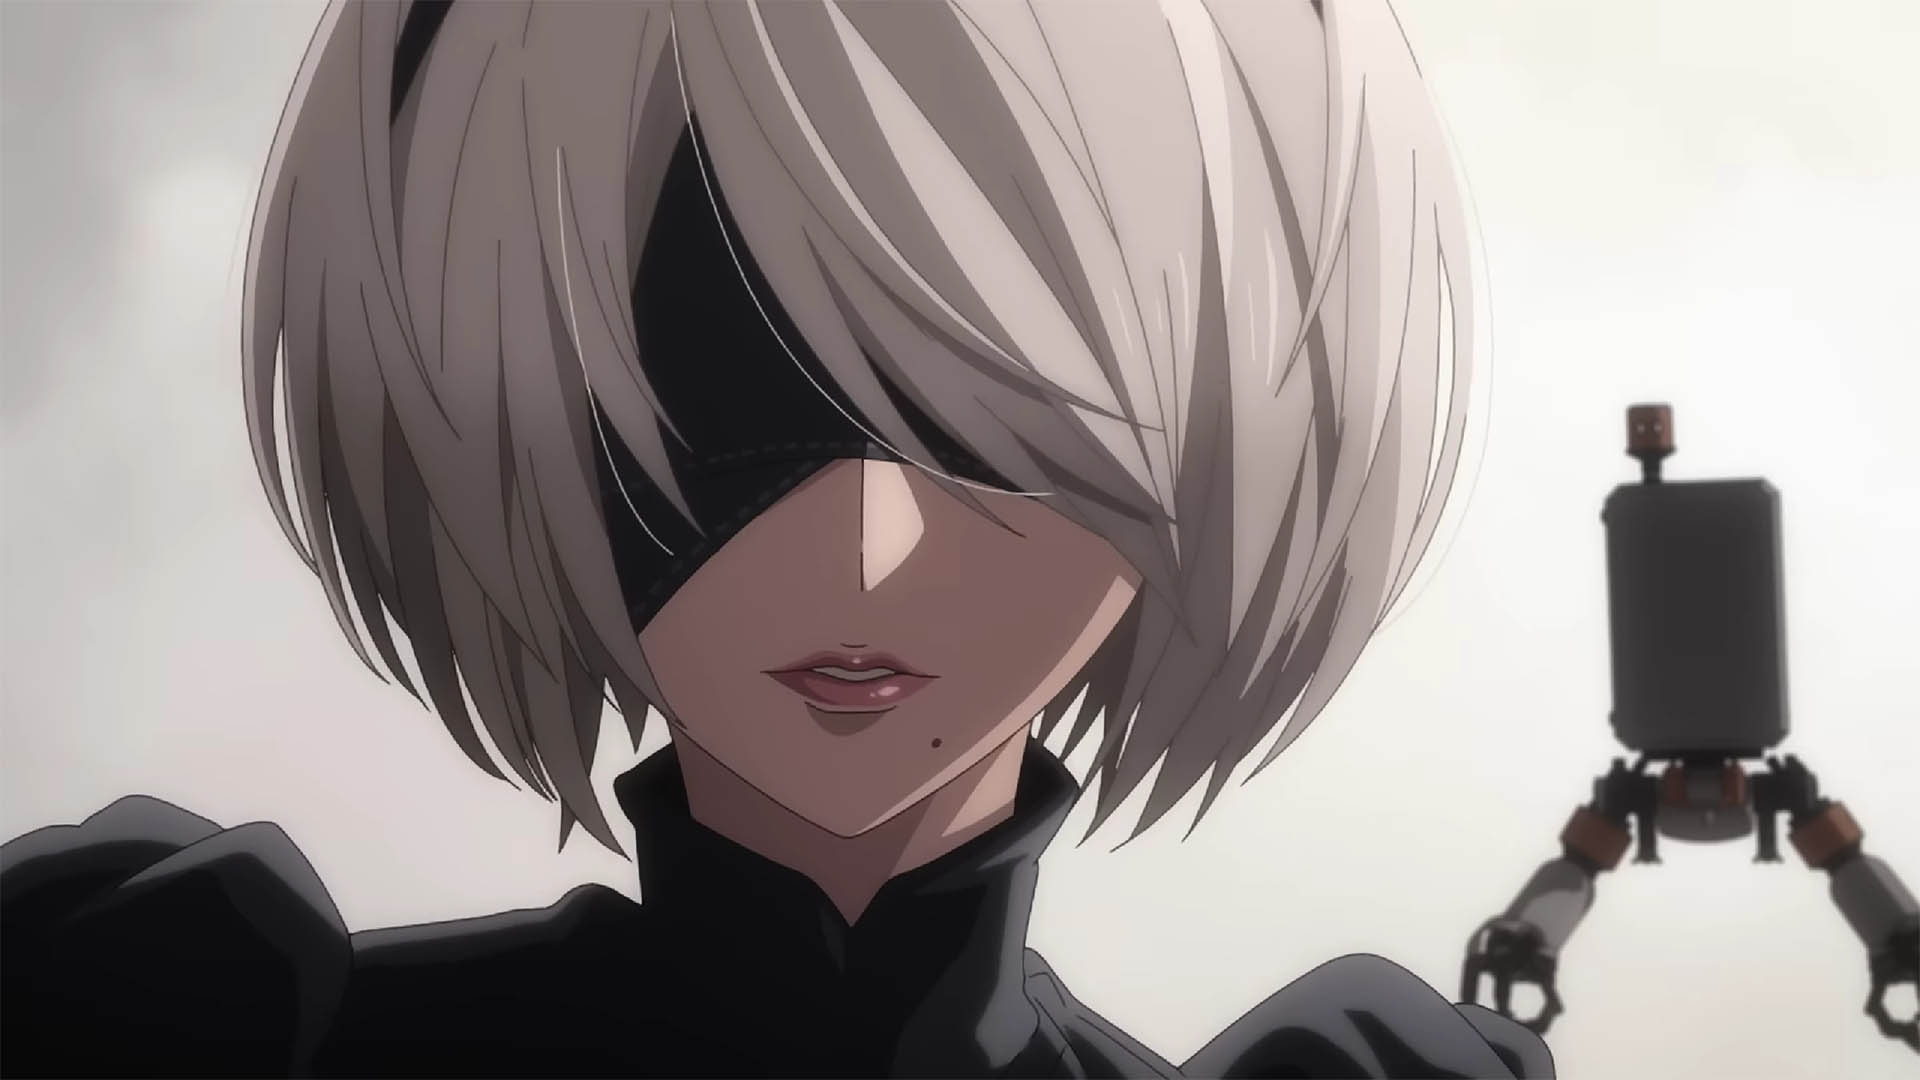 NieR: Automata Ver1.1a anime premiere date set for January